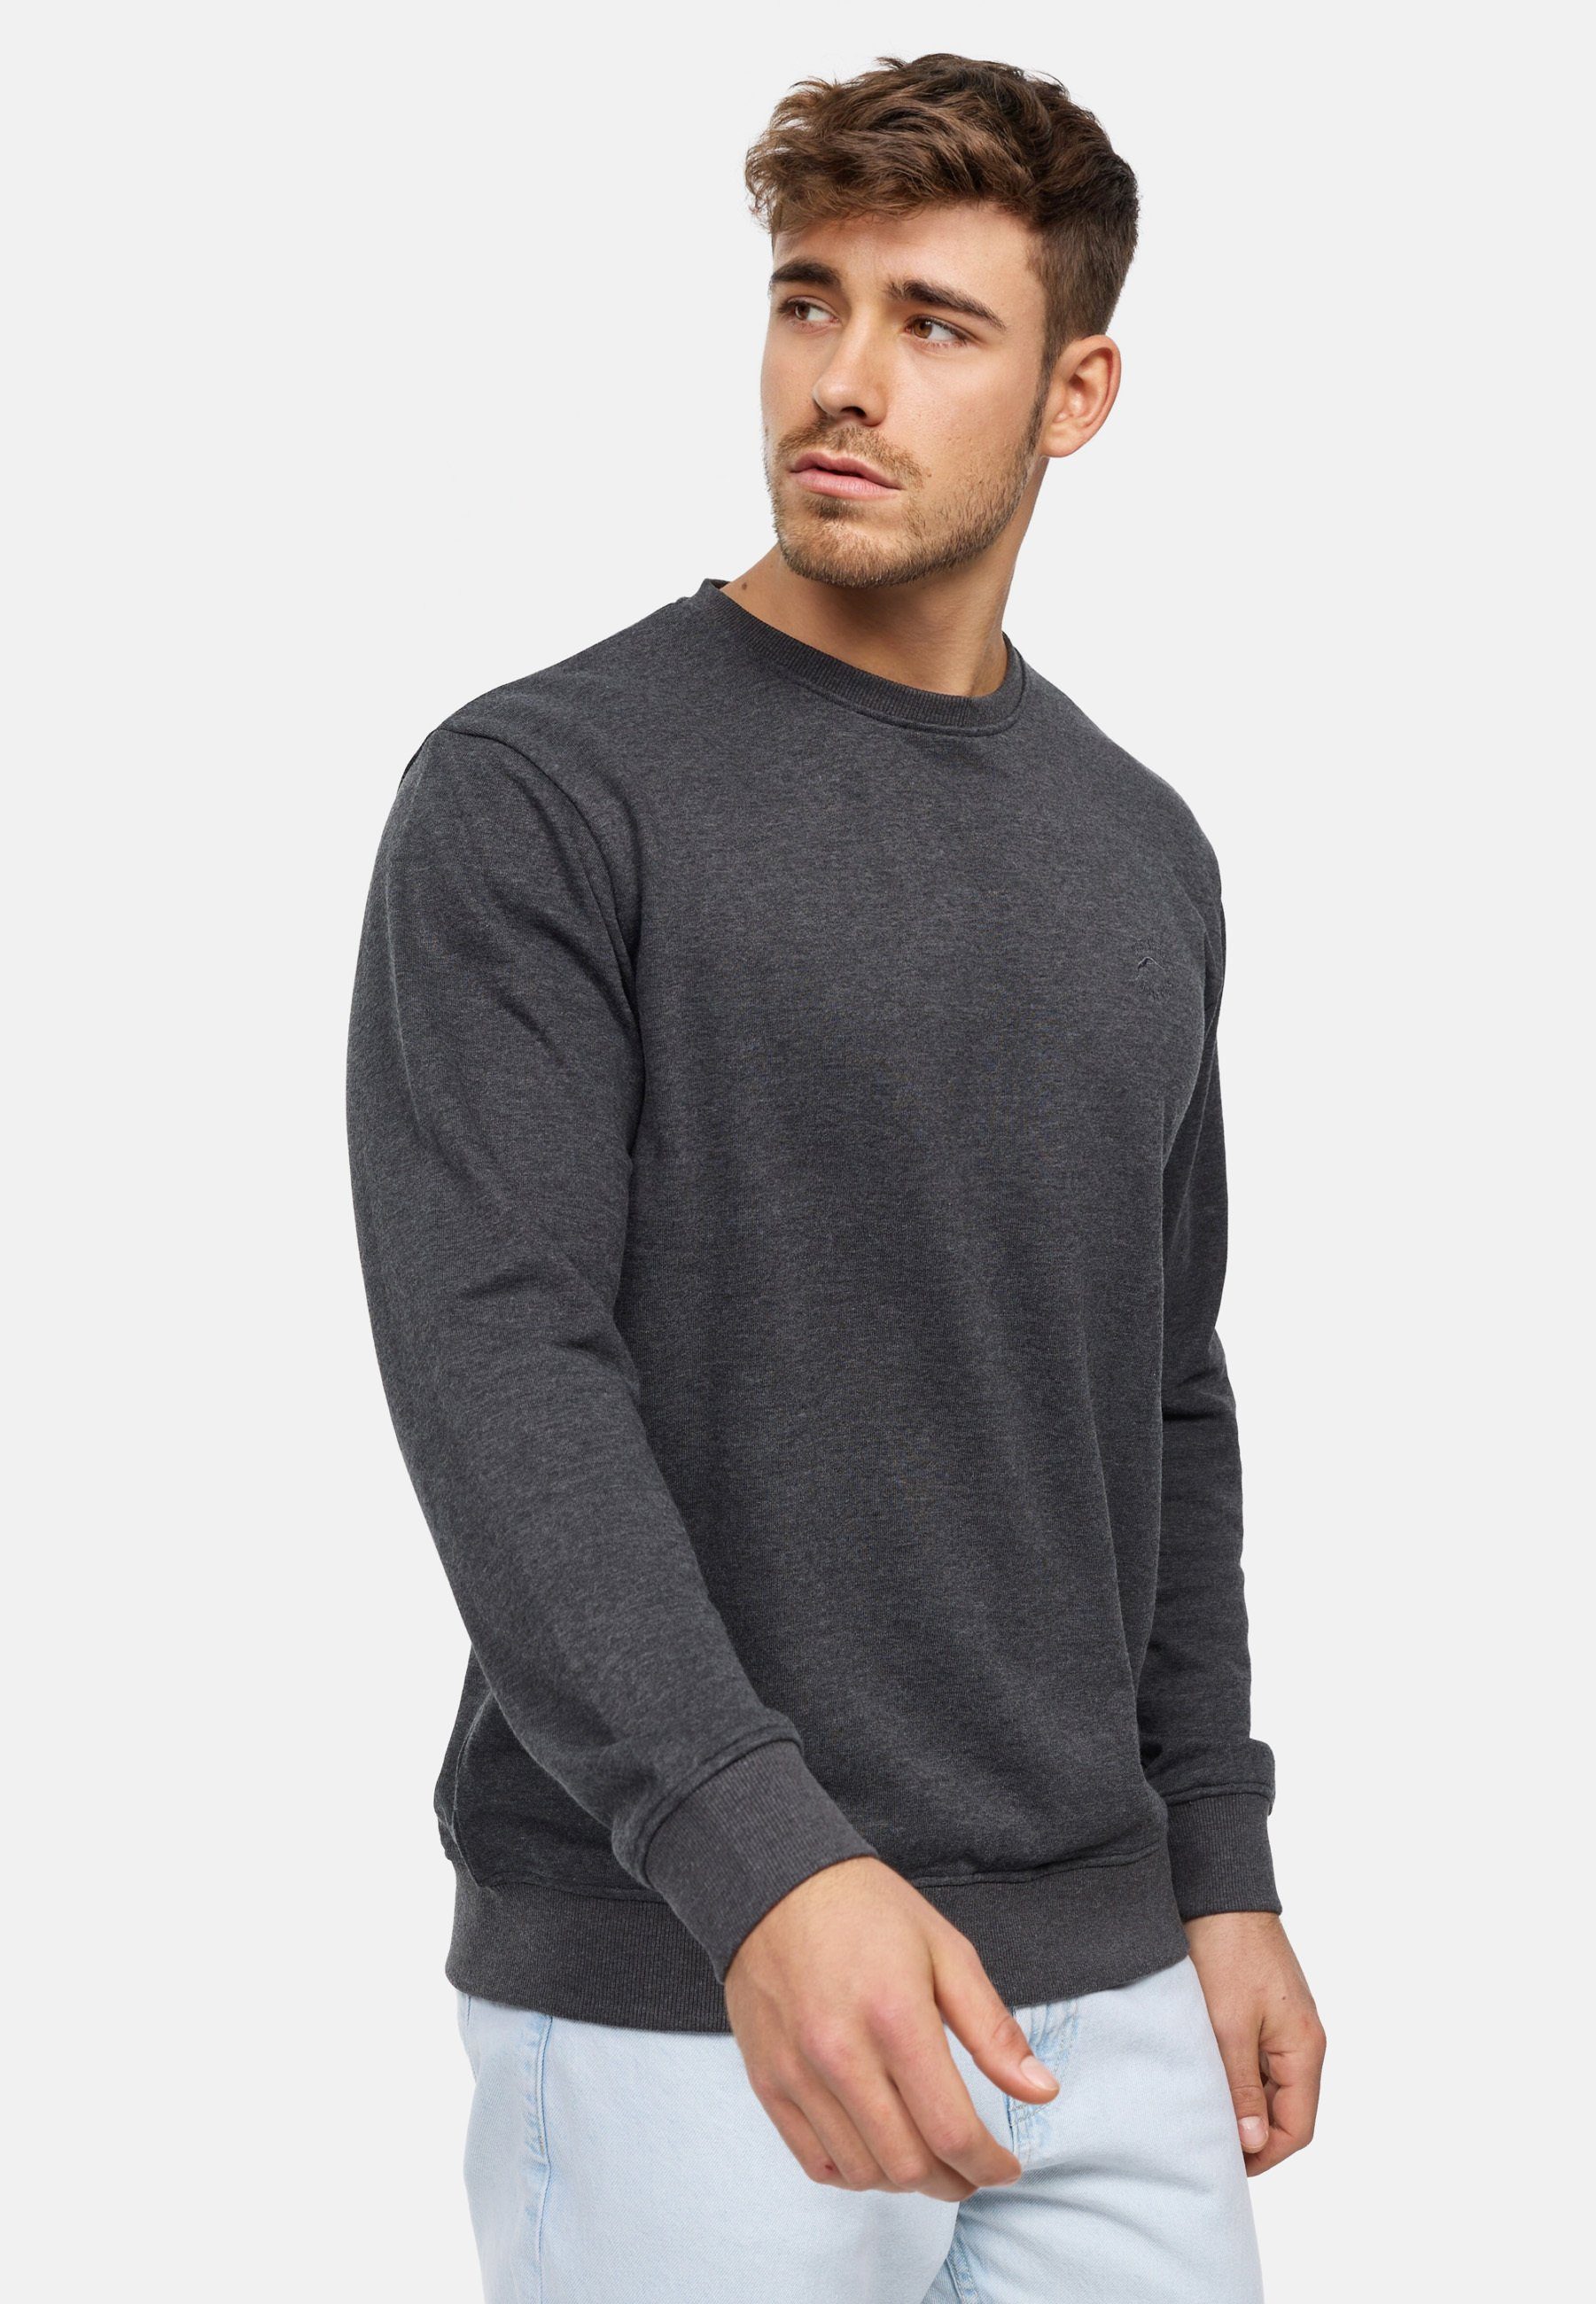 Charcoal Holt Mix Indicode Sweater